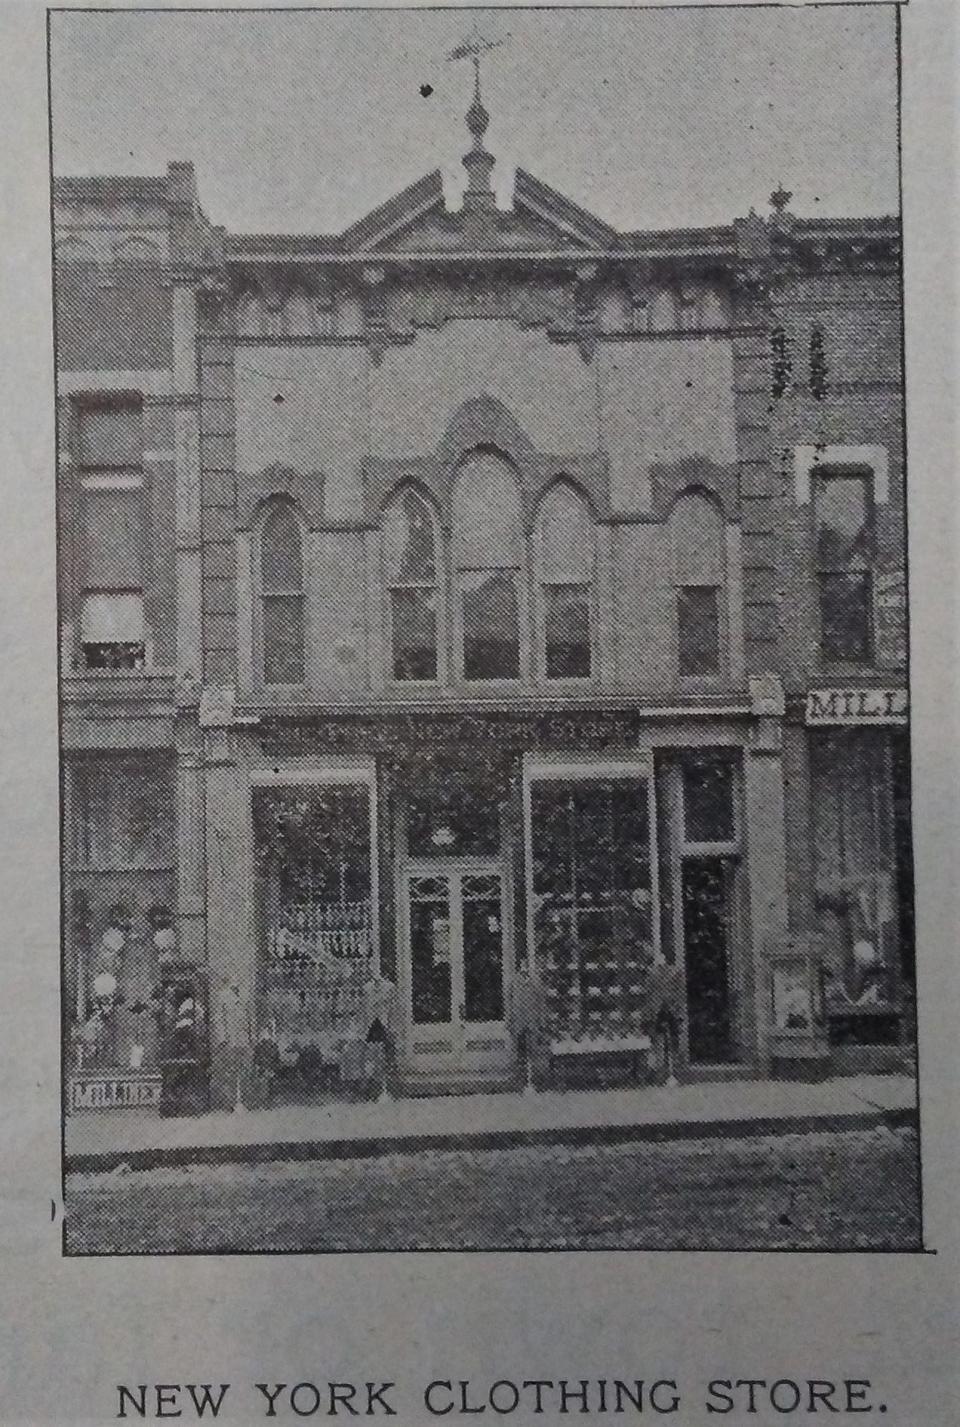 Pictured is the New York Clothing Store as shown in a photo in the Ashland Gazette in 1895.